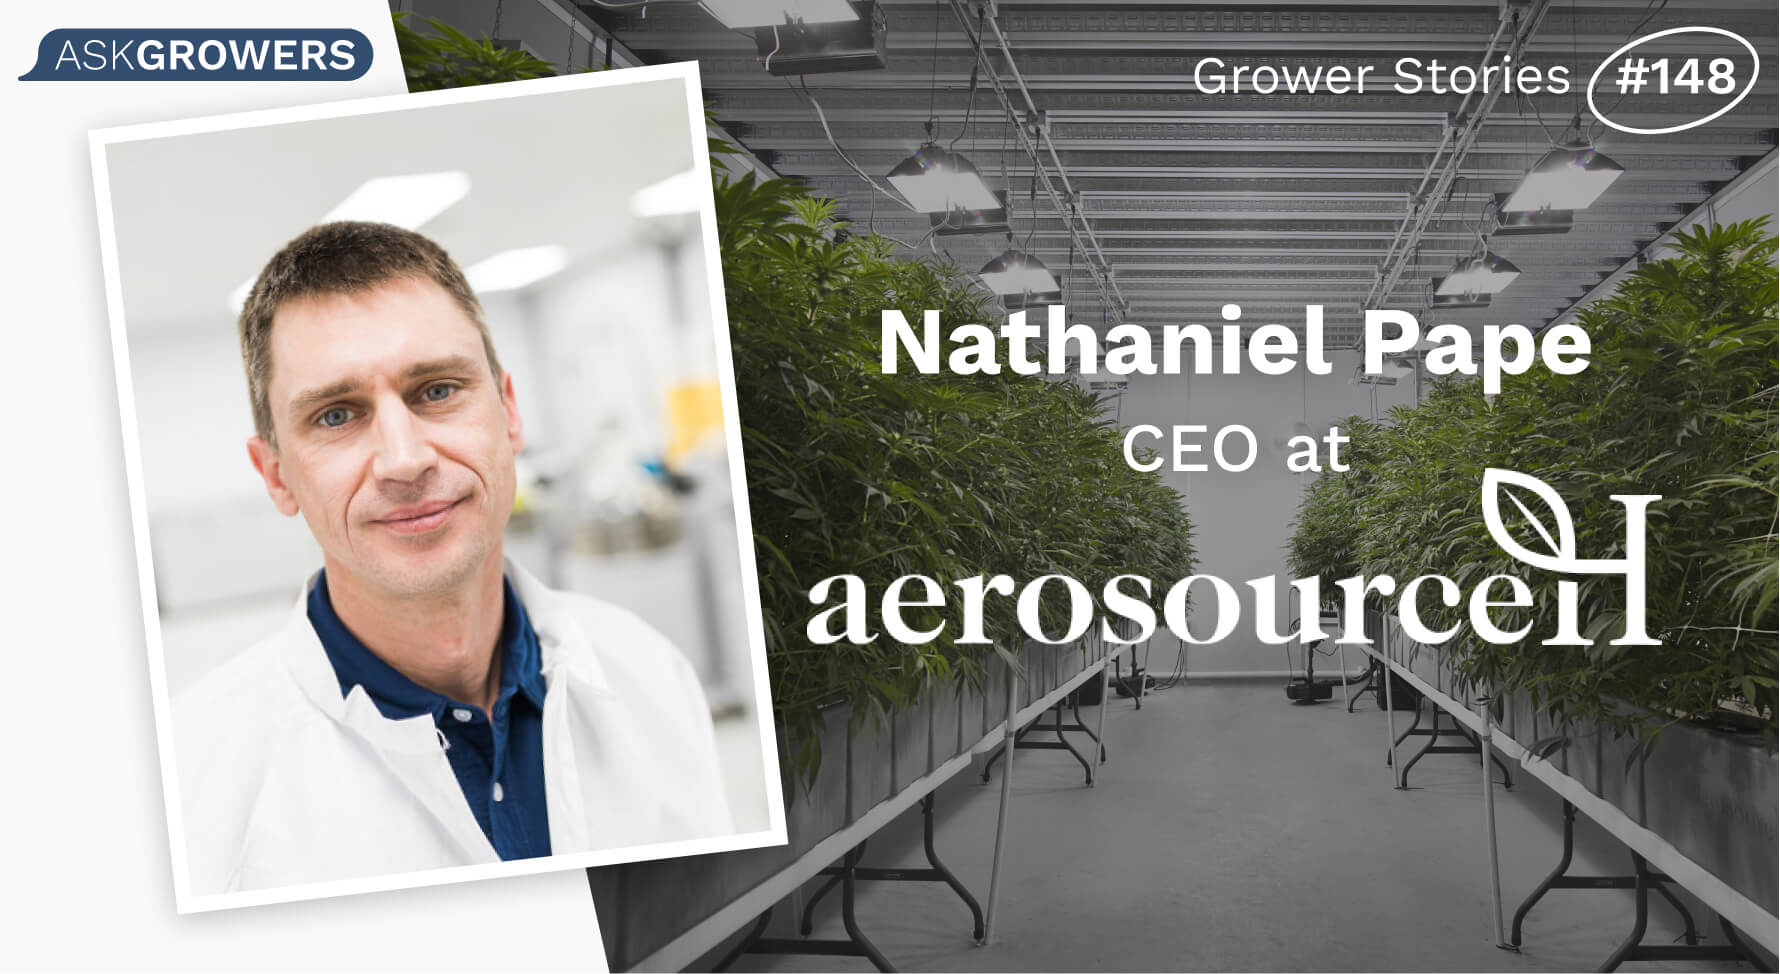 Grower Stories #148: Nathaniel Pape